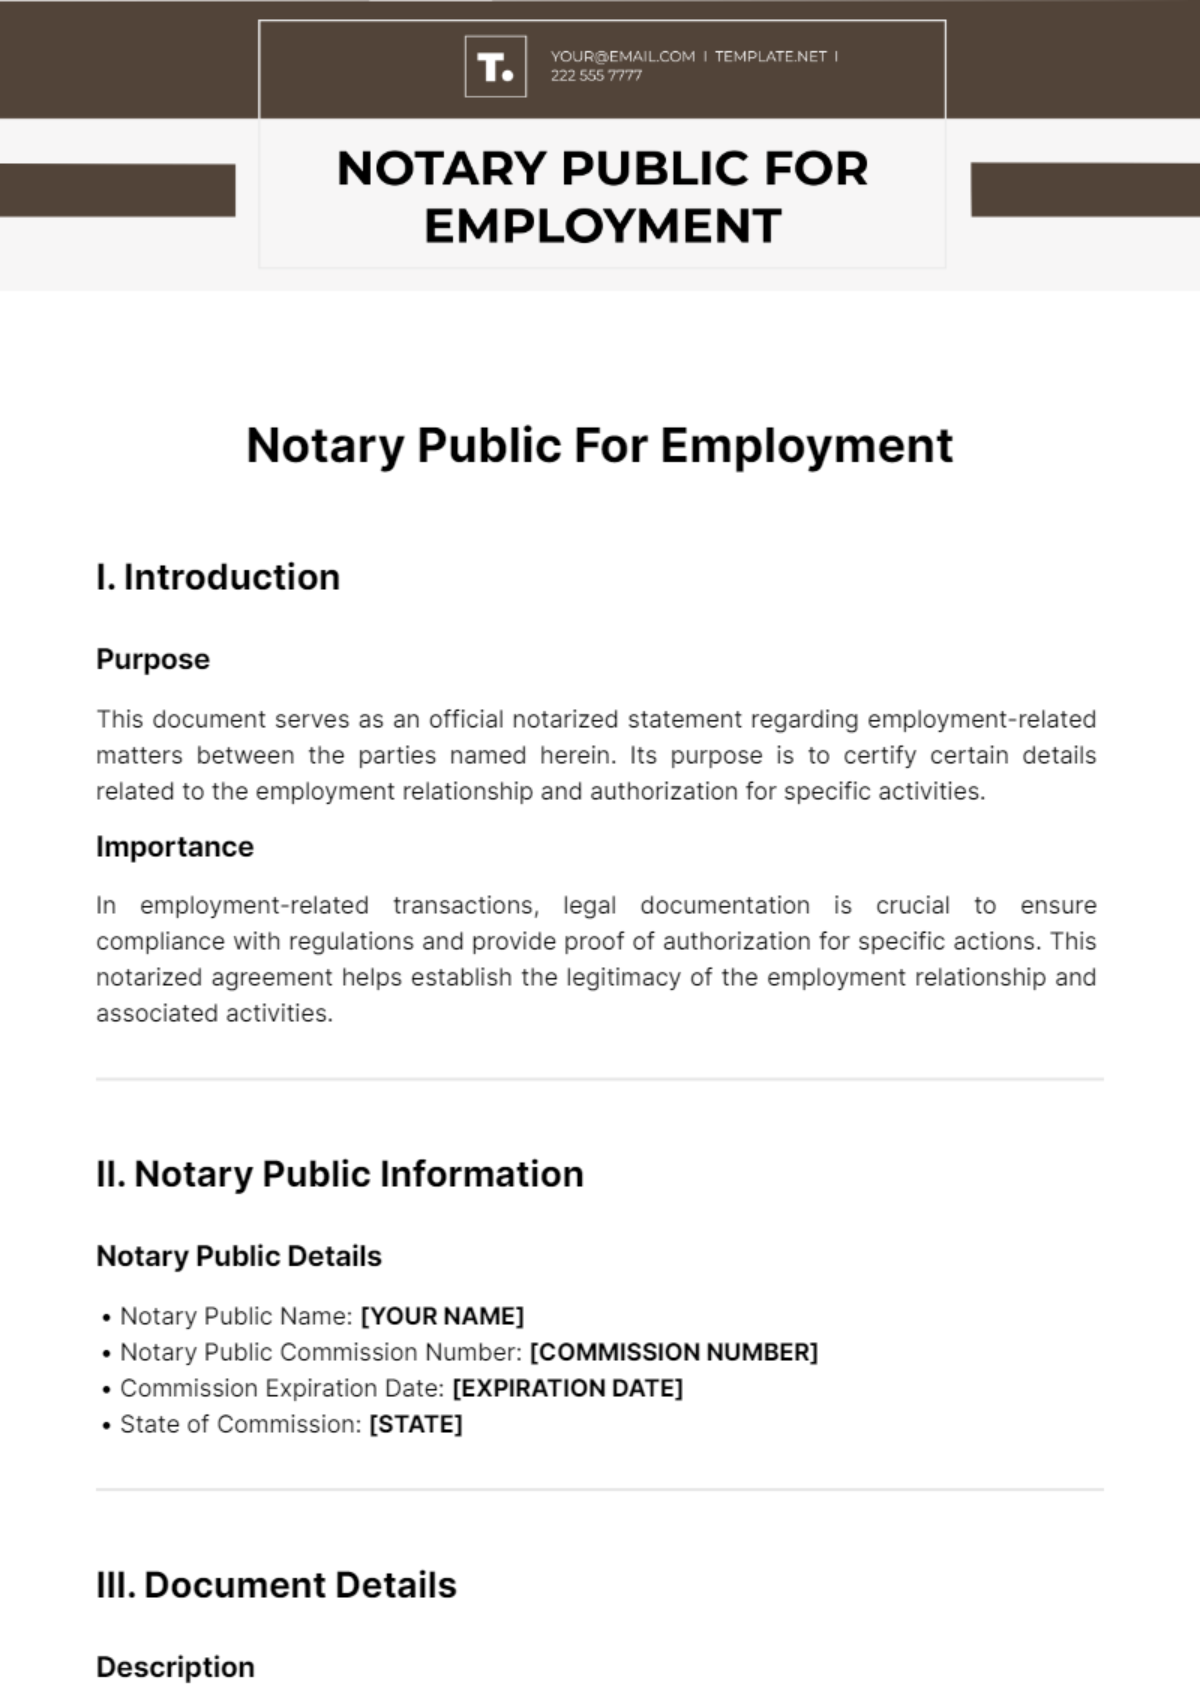 Notary Public For Employment Template